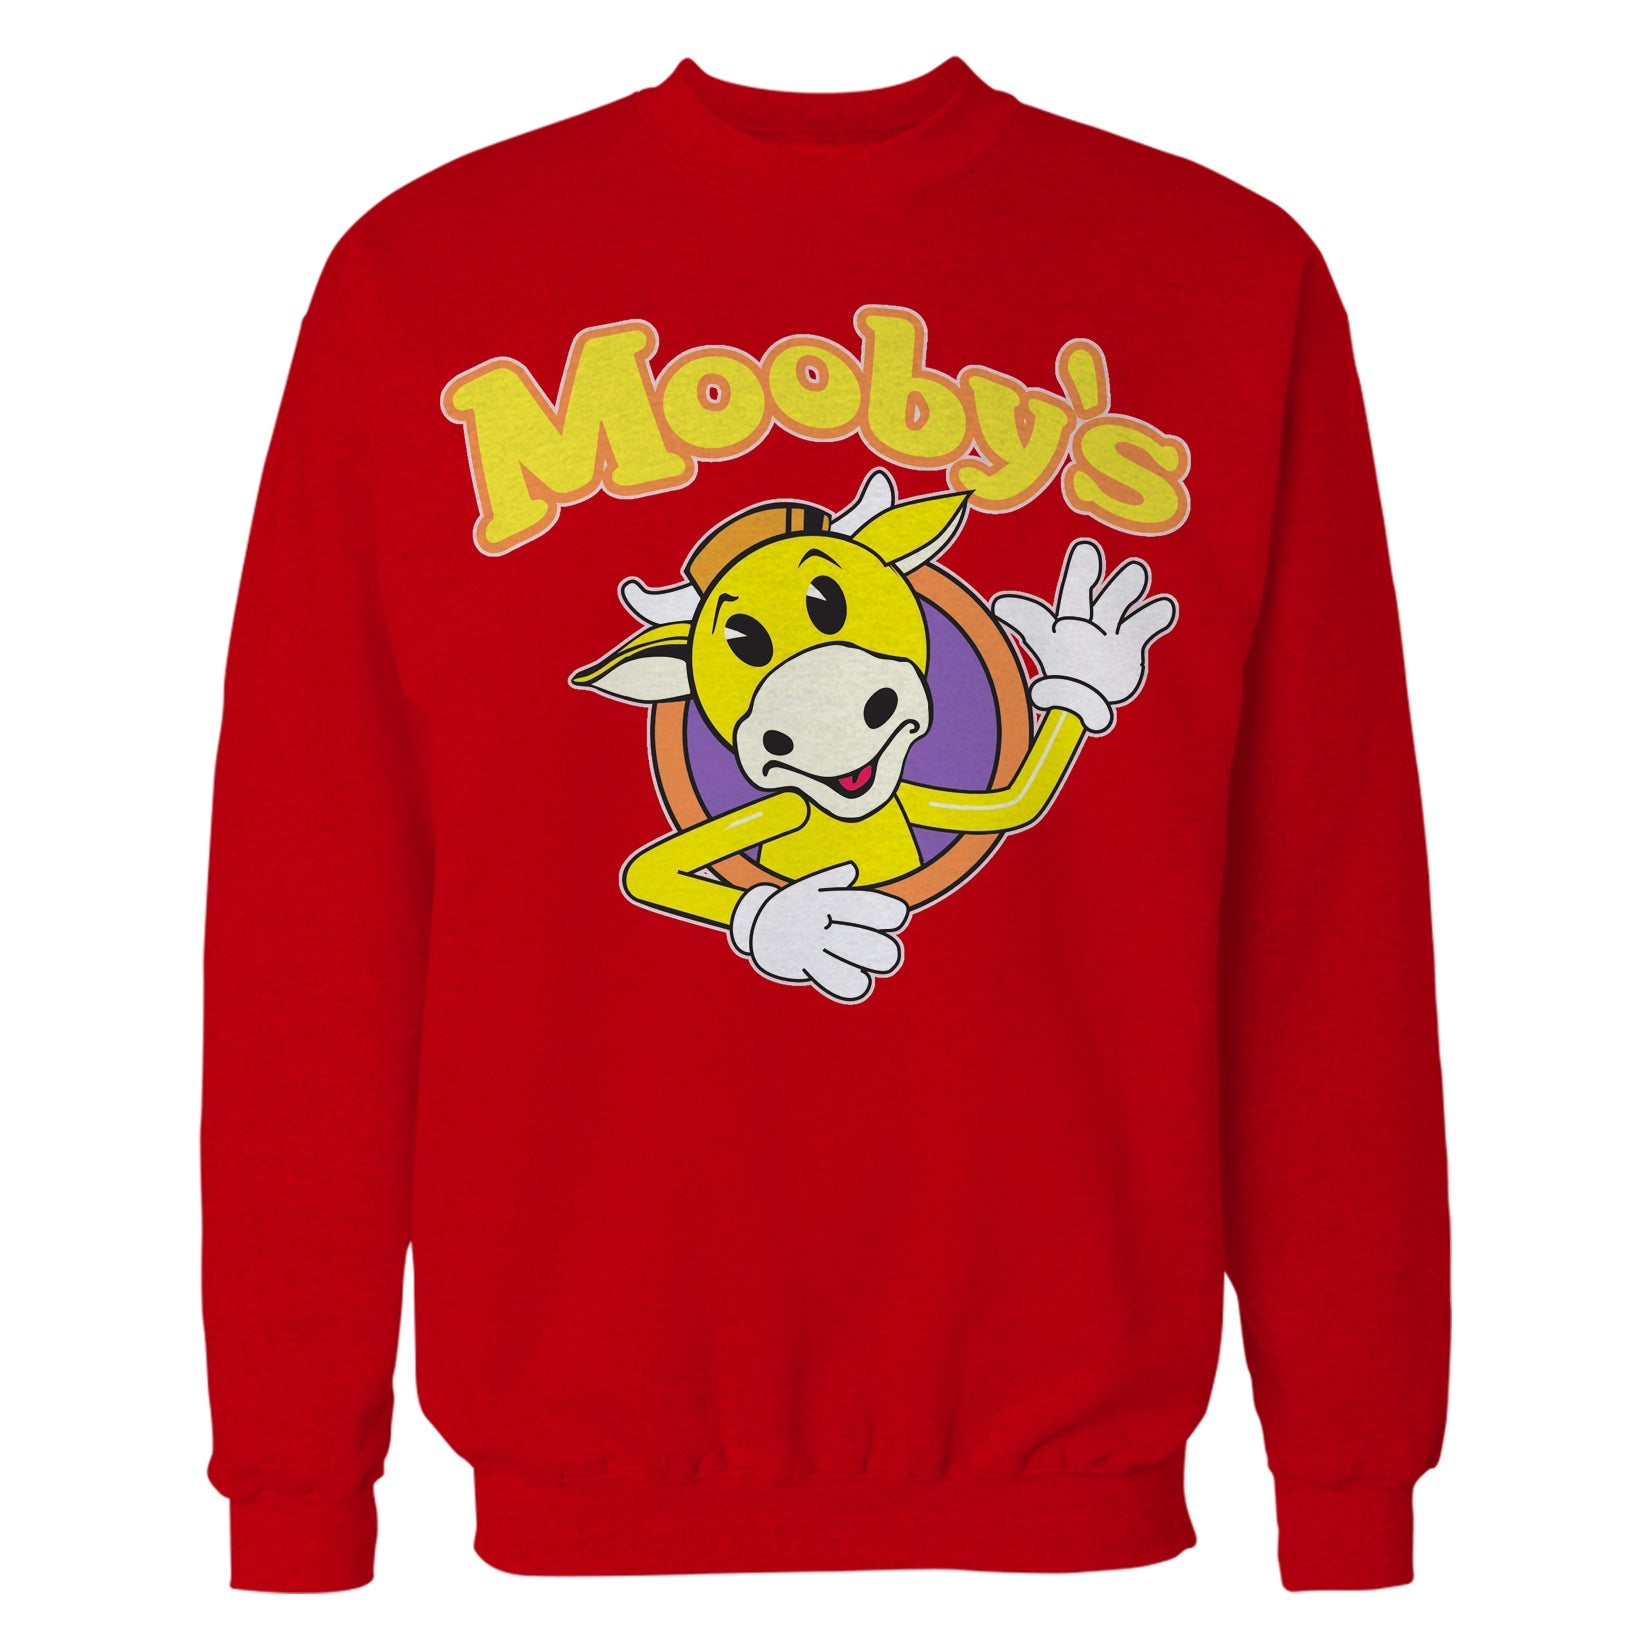 Kevin Smith View Askewniverse Mooby's Logo Official Sweatshirt